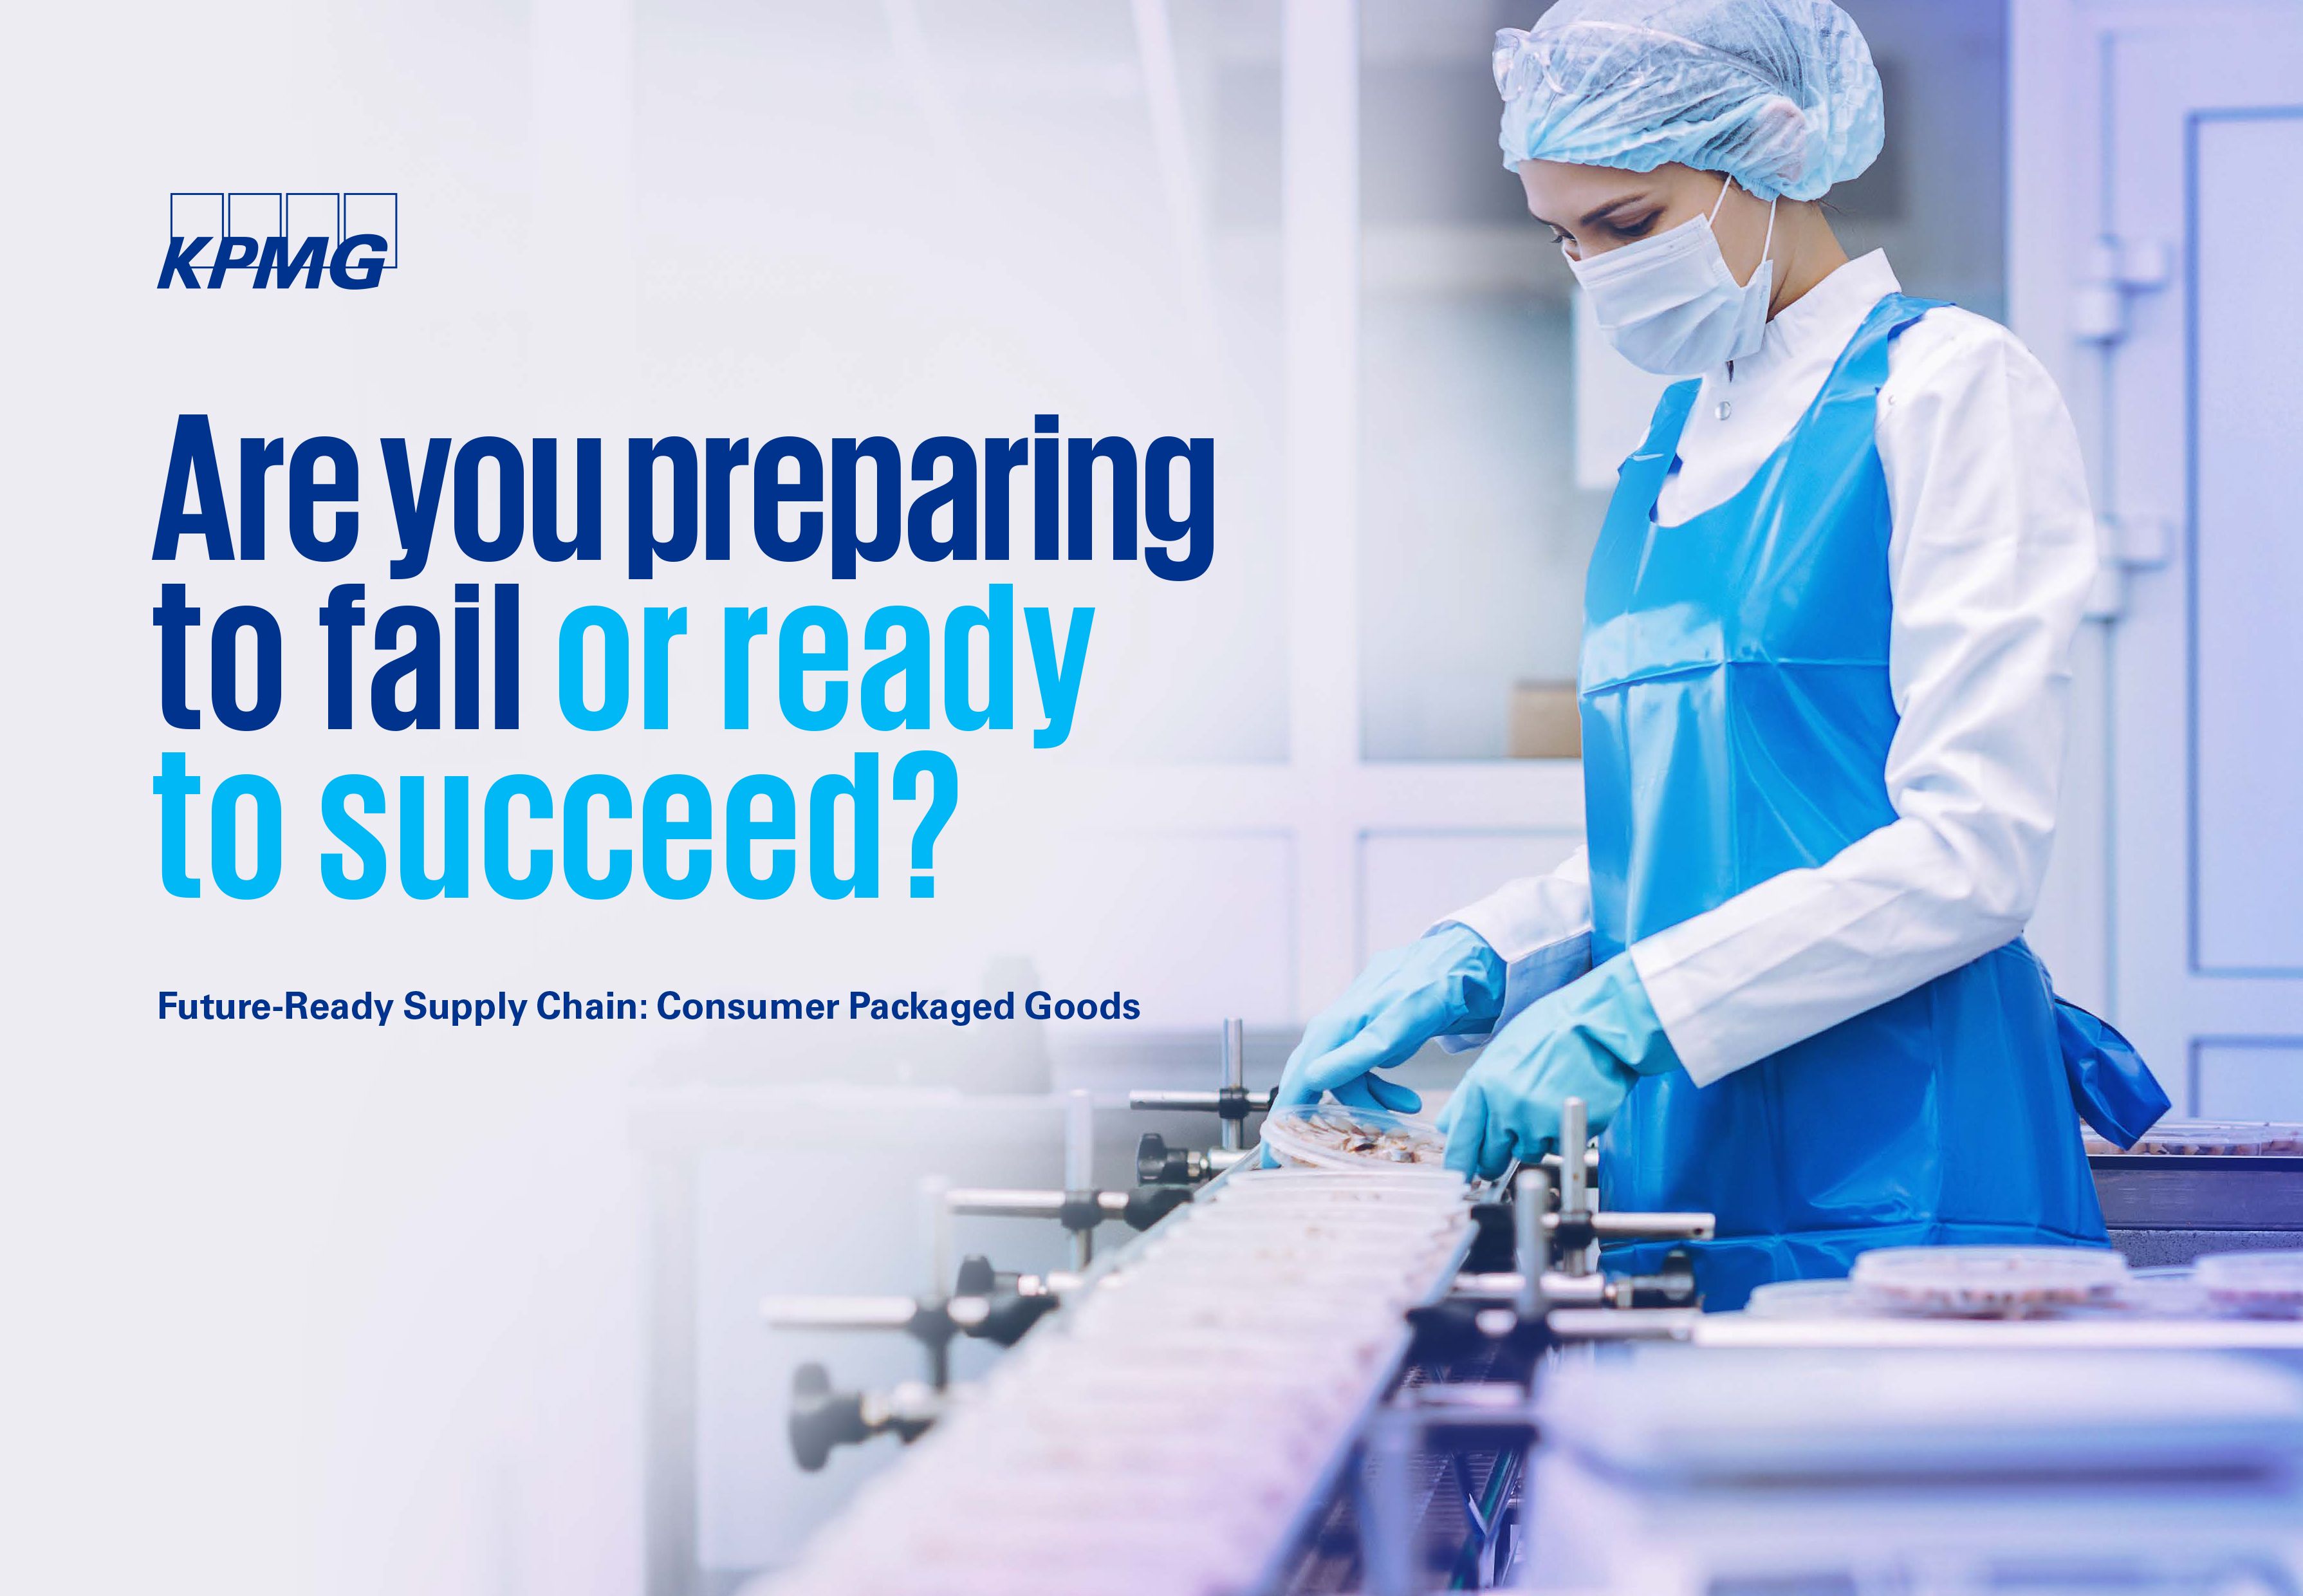 Future-ready supply chain: consumer packaged goods